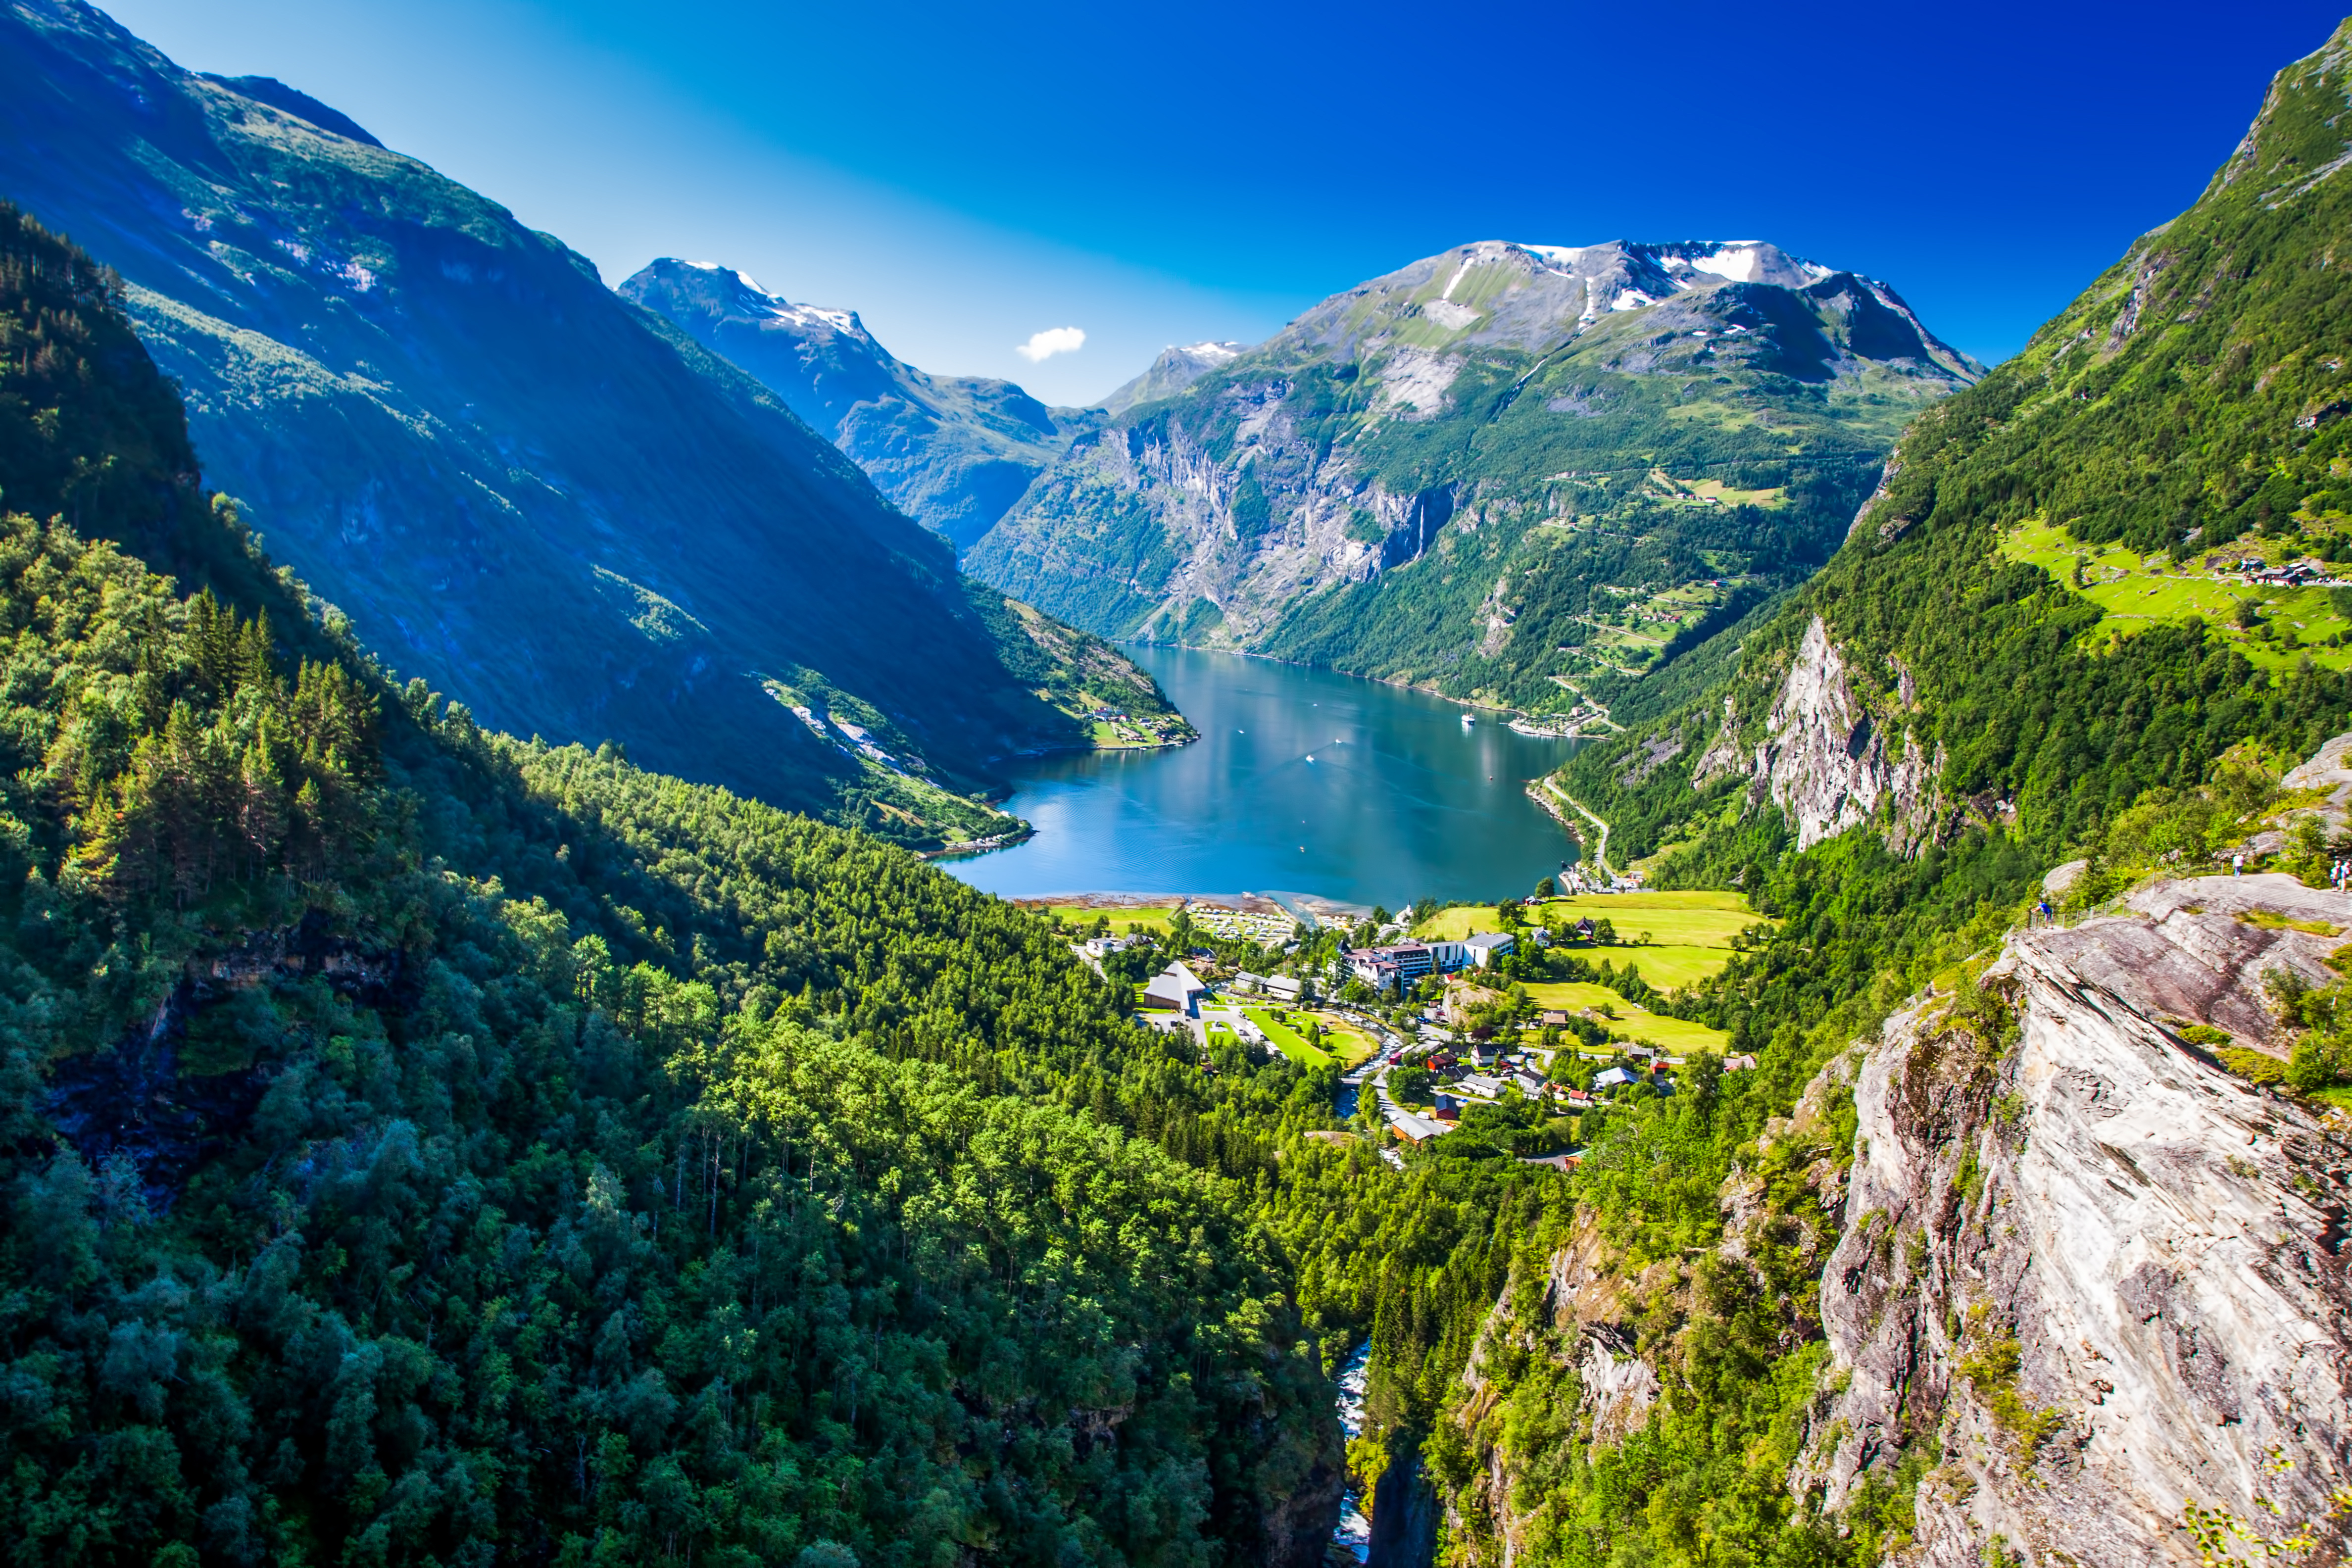 The Norwegian fjords are known for their outstanding natural beauty. Credit Shutterstock